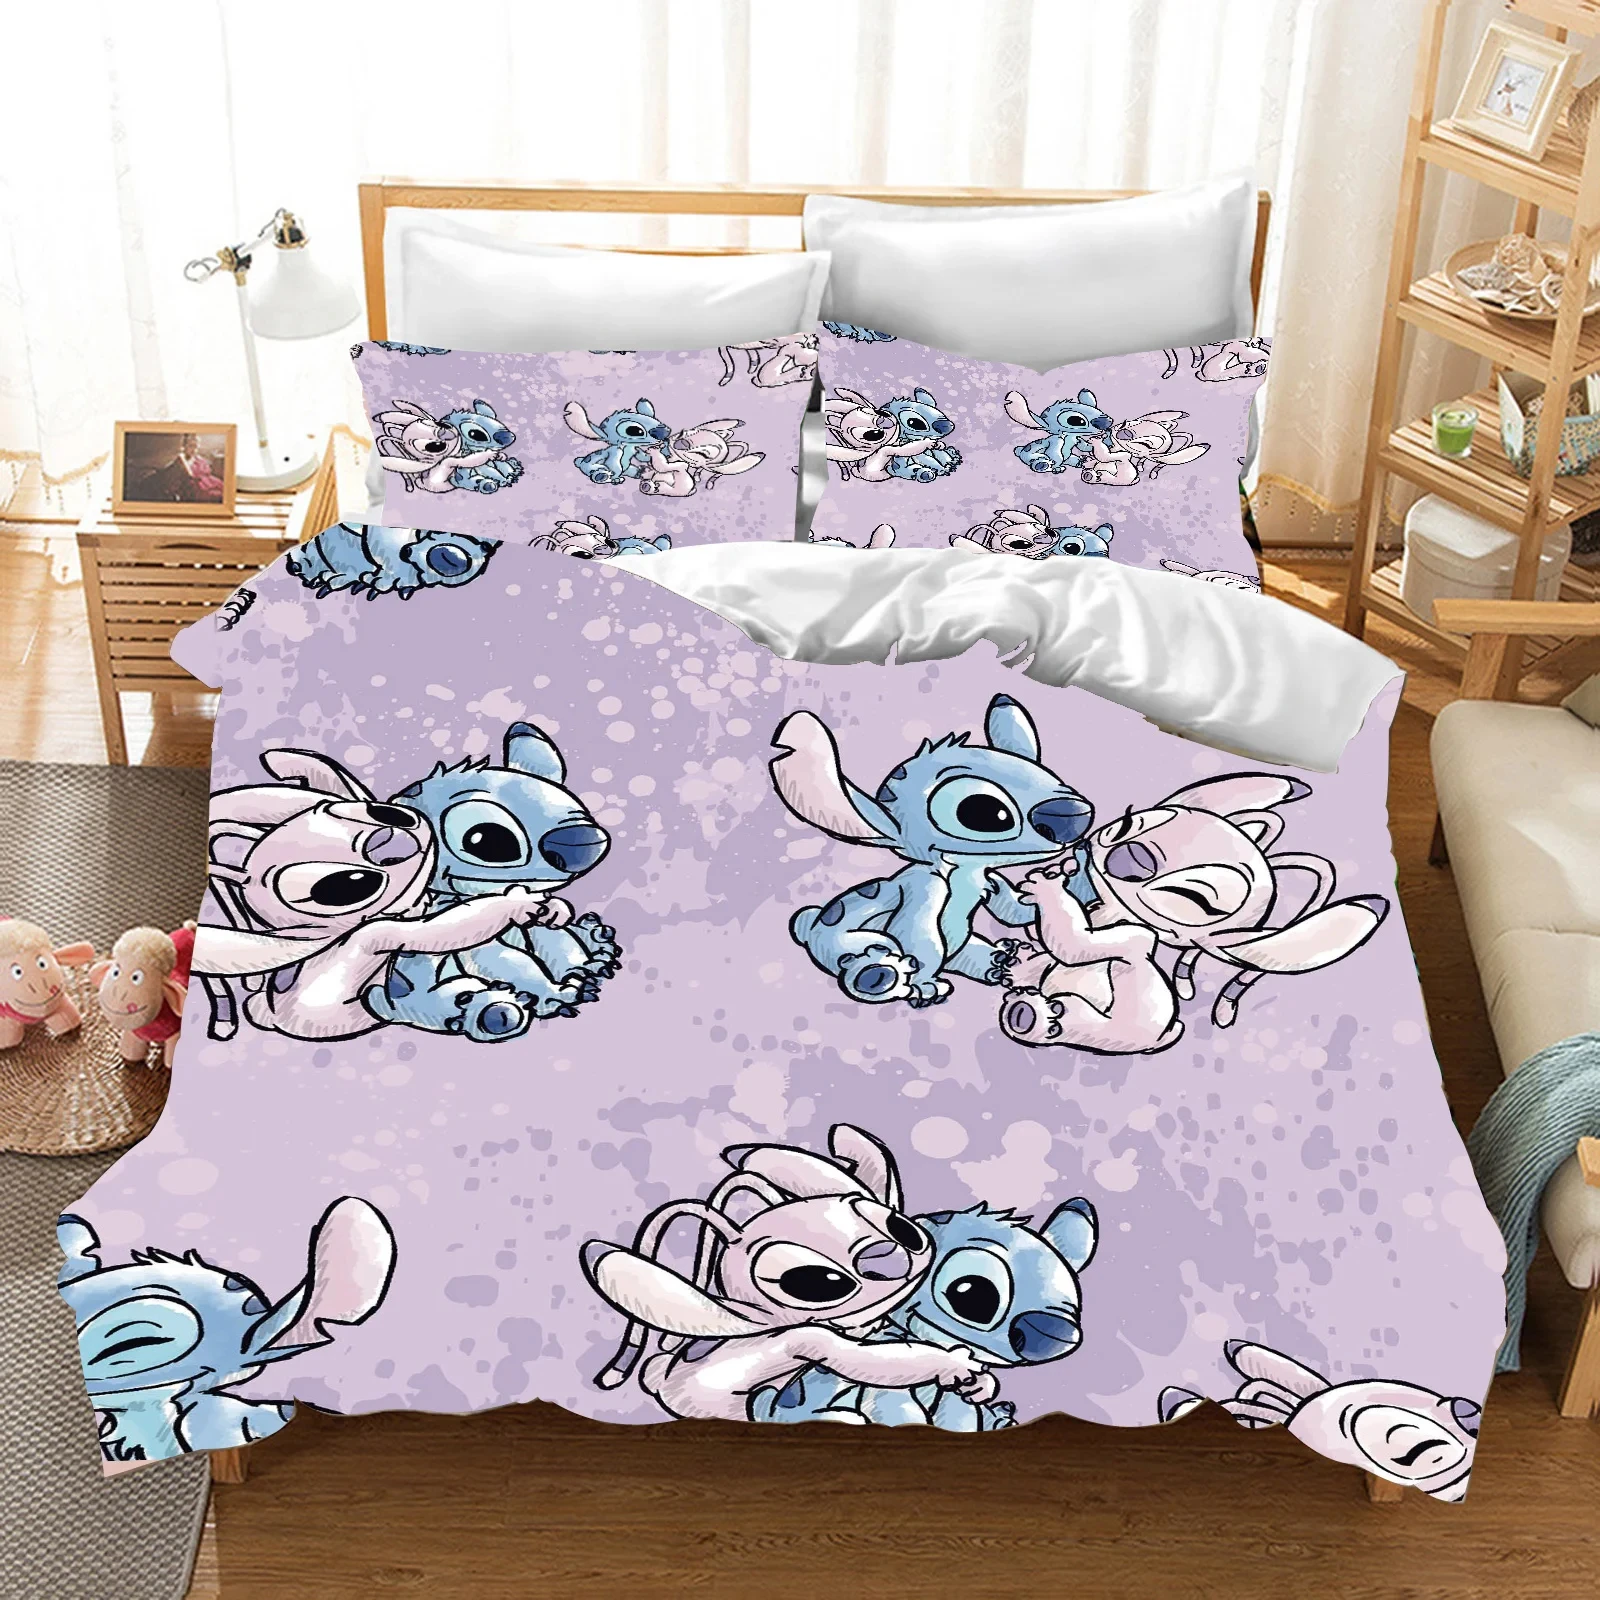 

Disney Stitch New Design Cute Duvet Cover Kids Bedding Set Girls Boys Comforter Cover for Bedroom Decorations Gifts Full Size